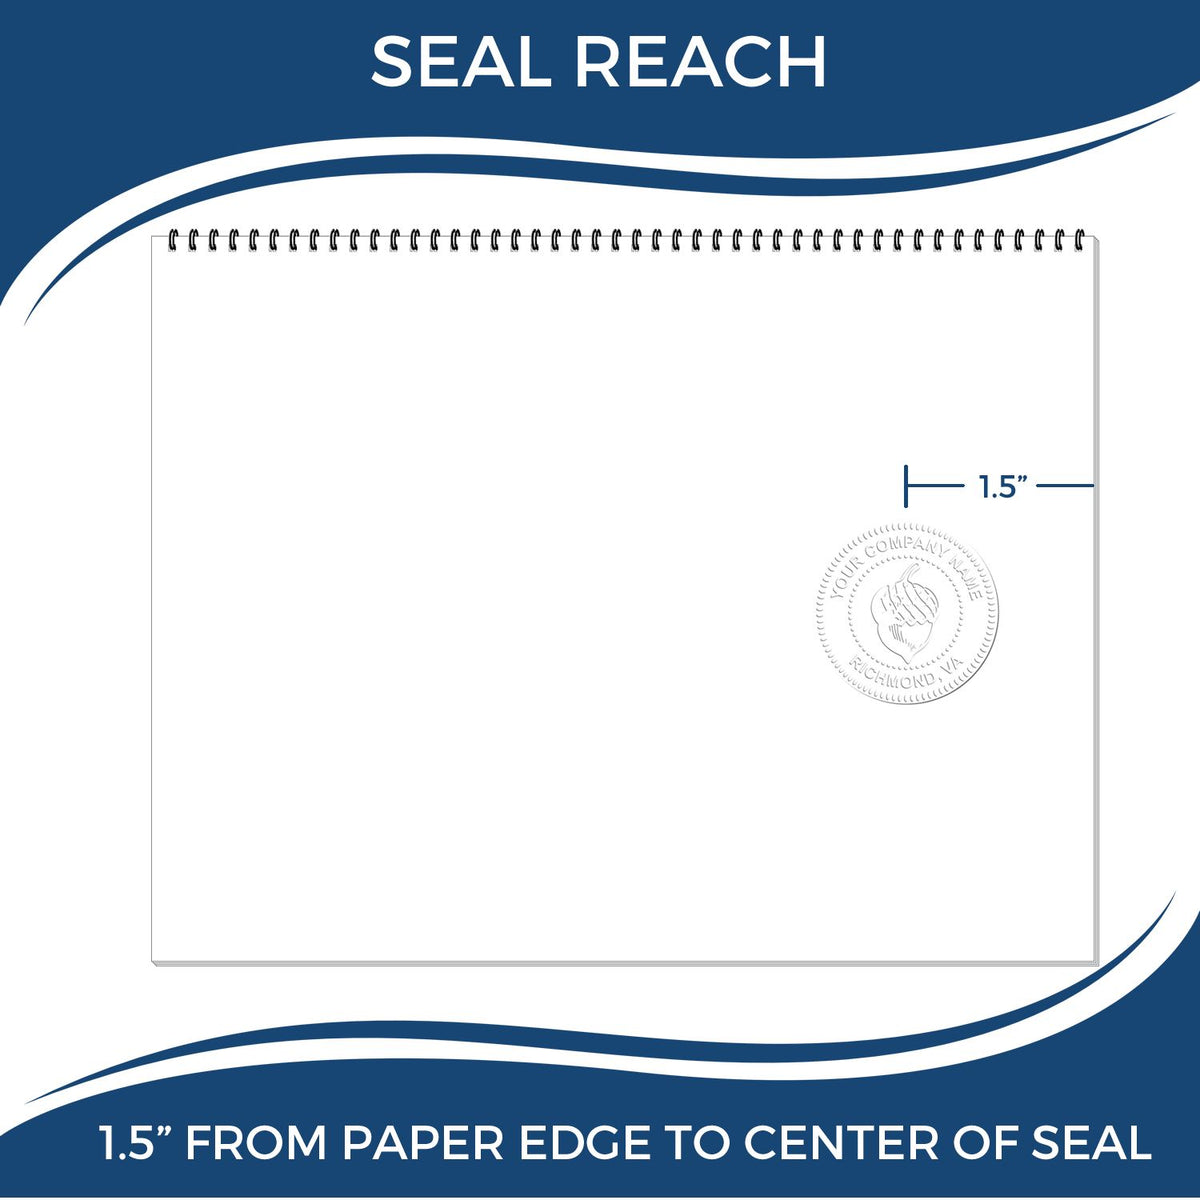 An infographic showing the seal reach which is represented by a ruler and a miniature seal image of the Hybrid Nebraska Land Surveyor Seal